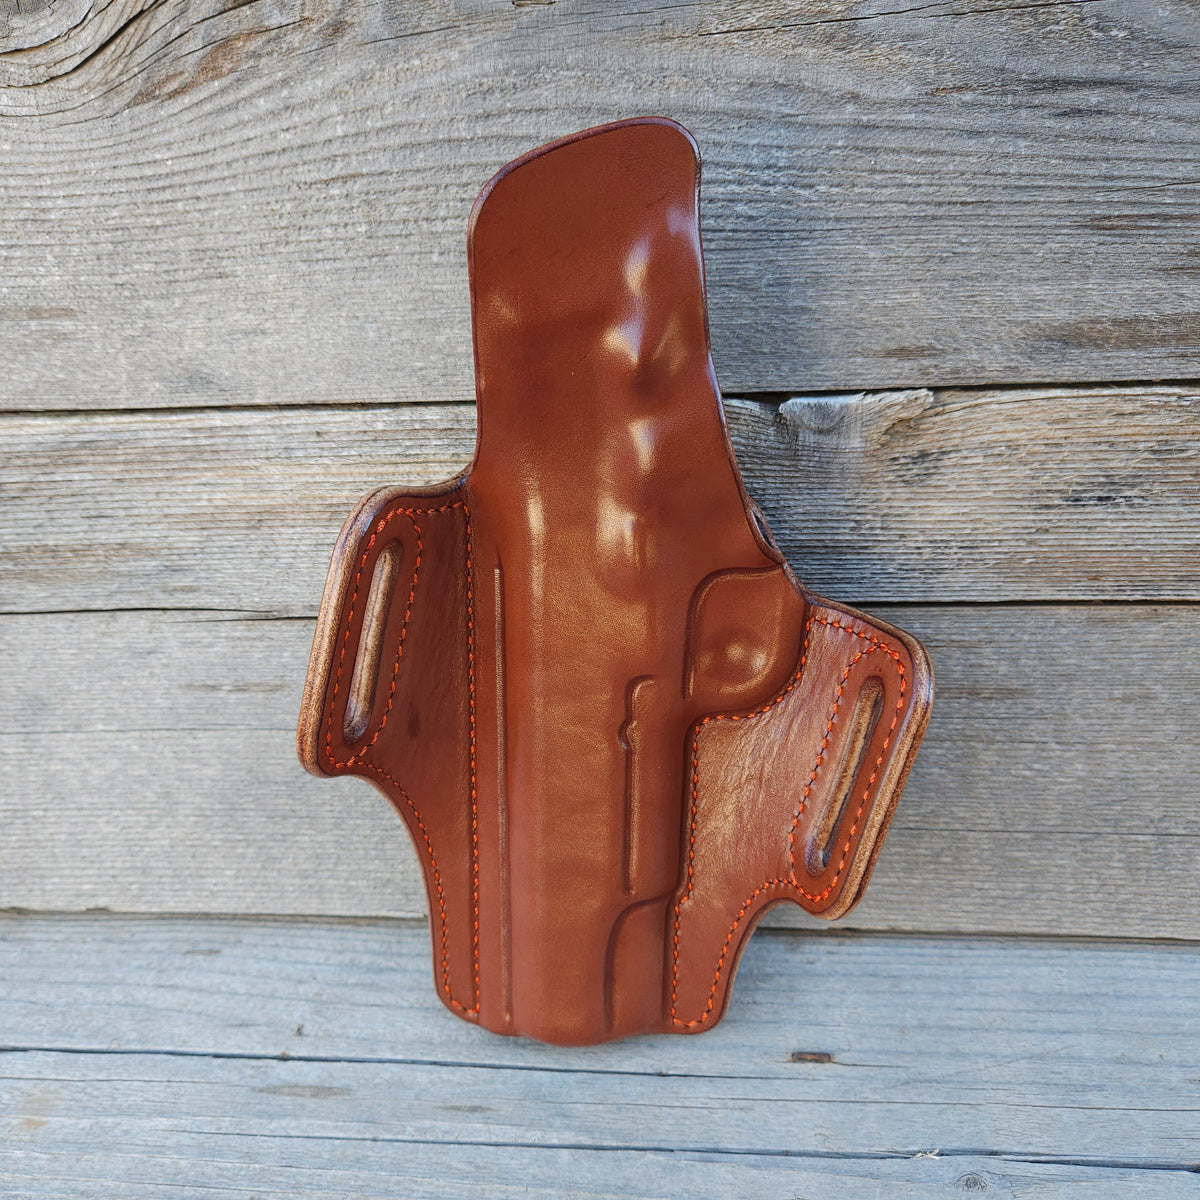 5" 1911 Classic Holster Brn/Ches Burnt Orange Stitching and basket stamp